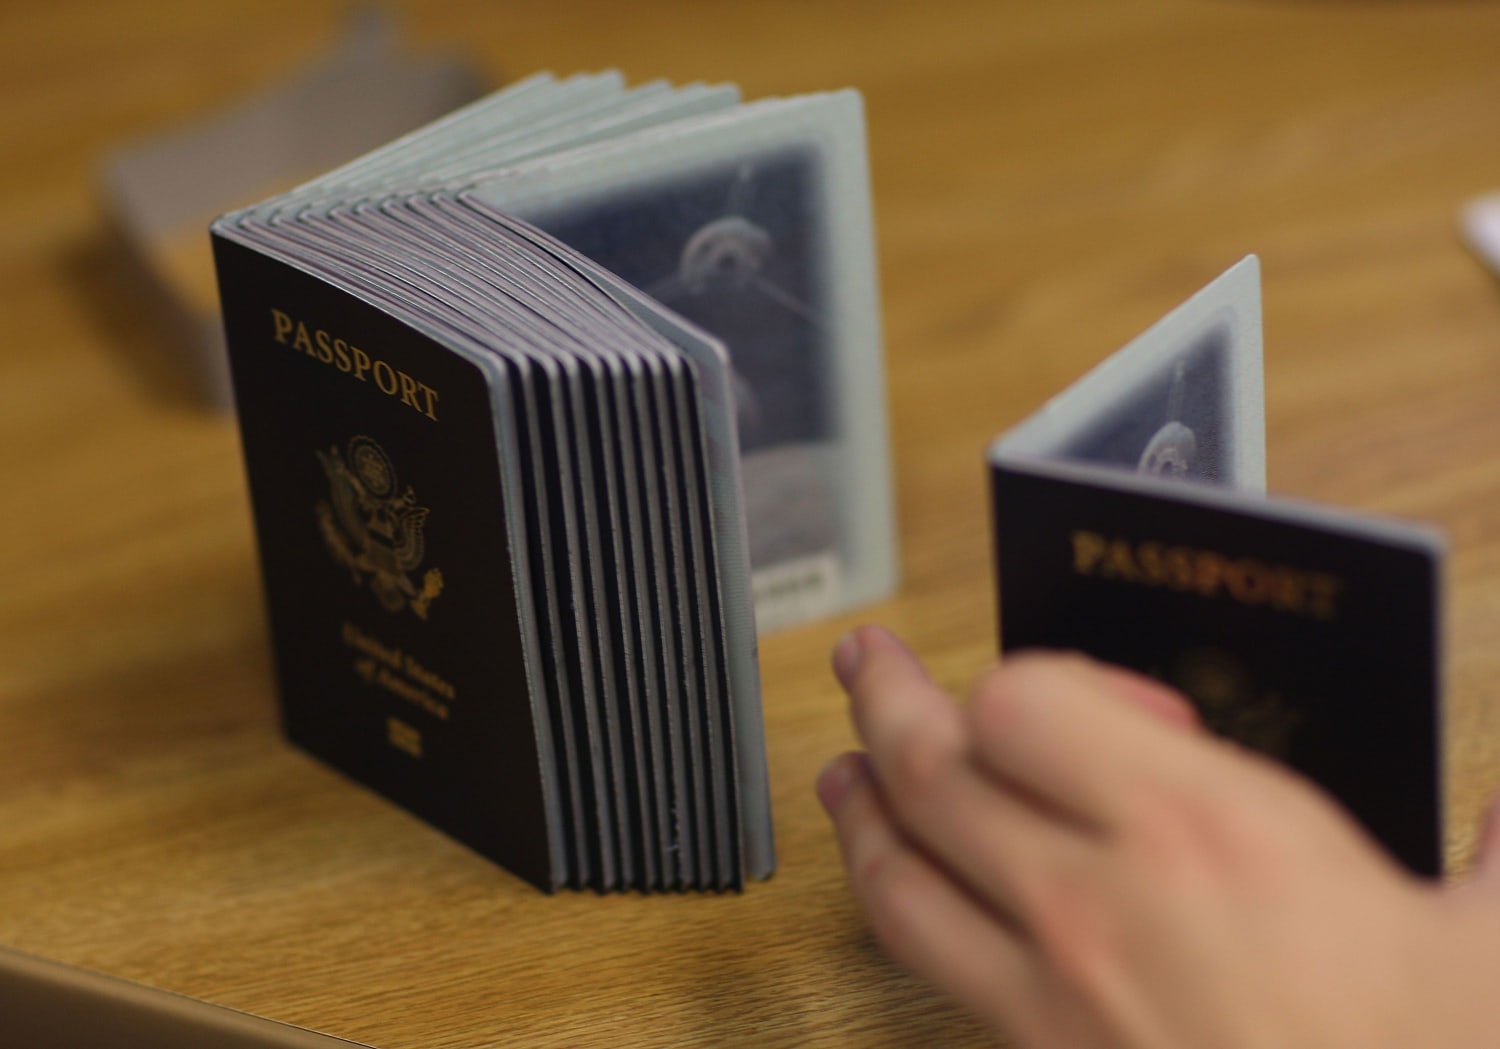 5 Passport Myths Every Traveler Can Forget